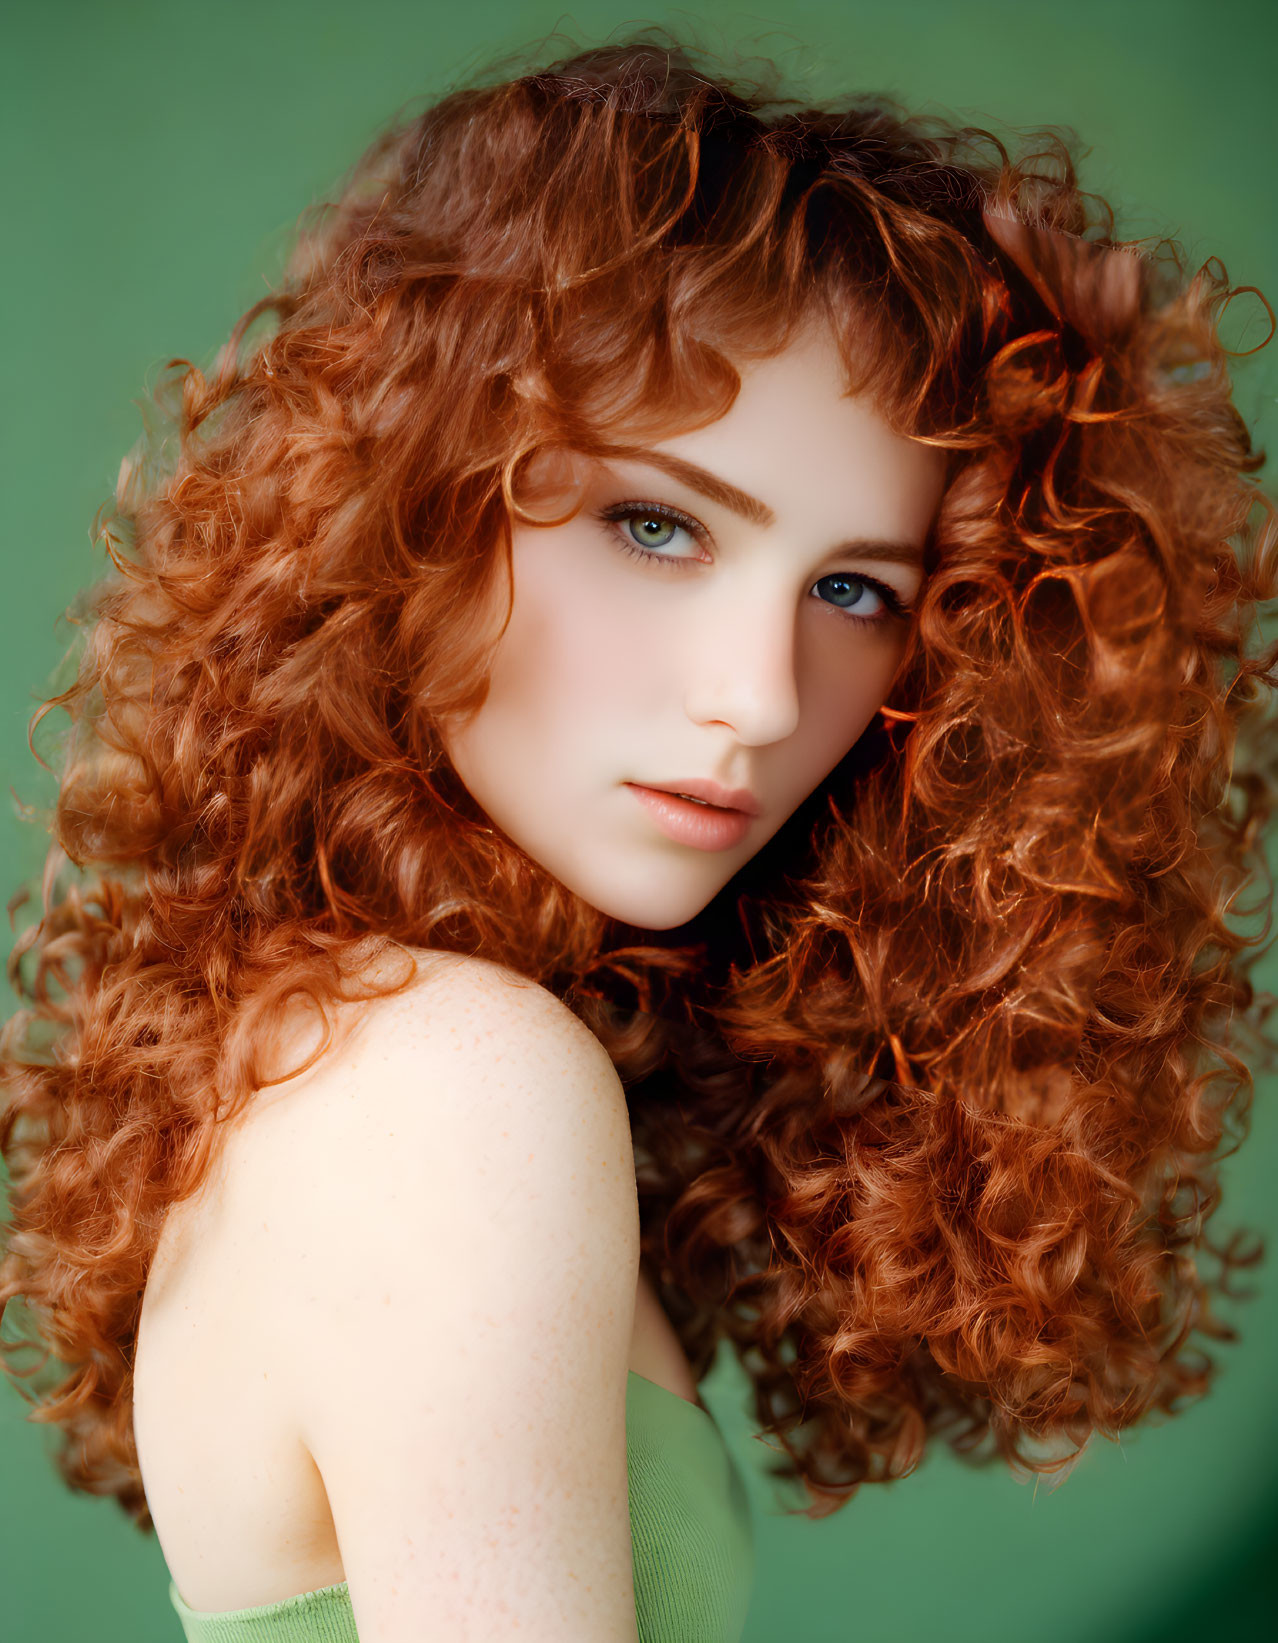 Curly Red-Haired Woman with Blue Eyes on Green Background